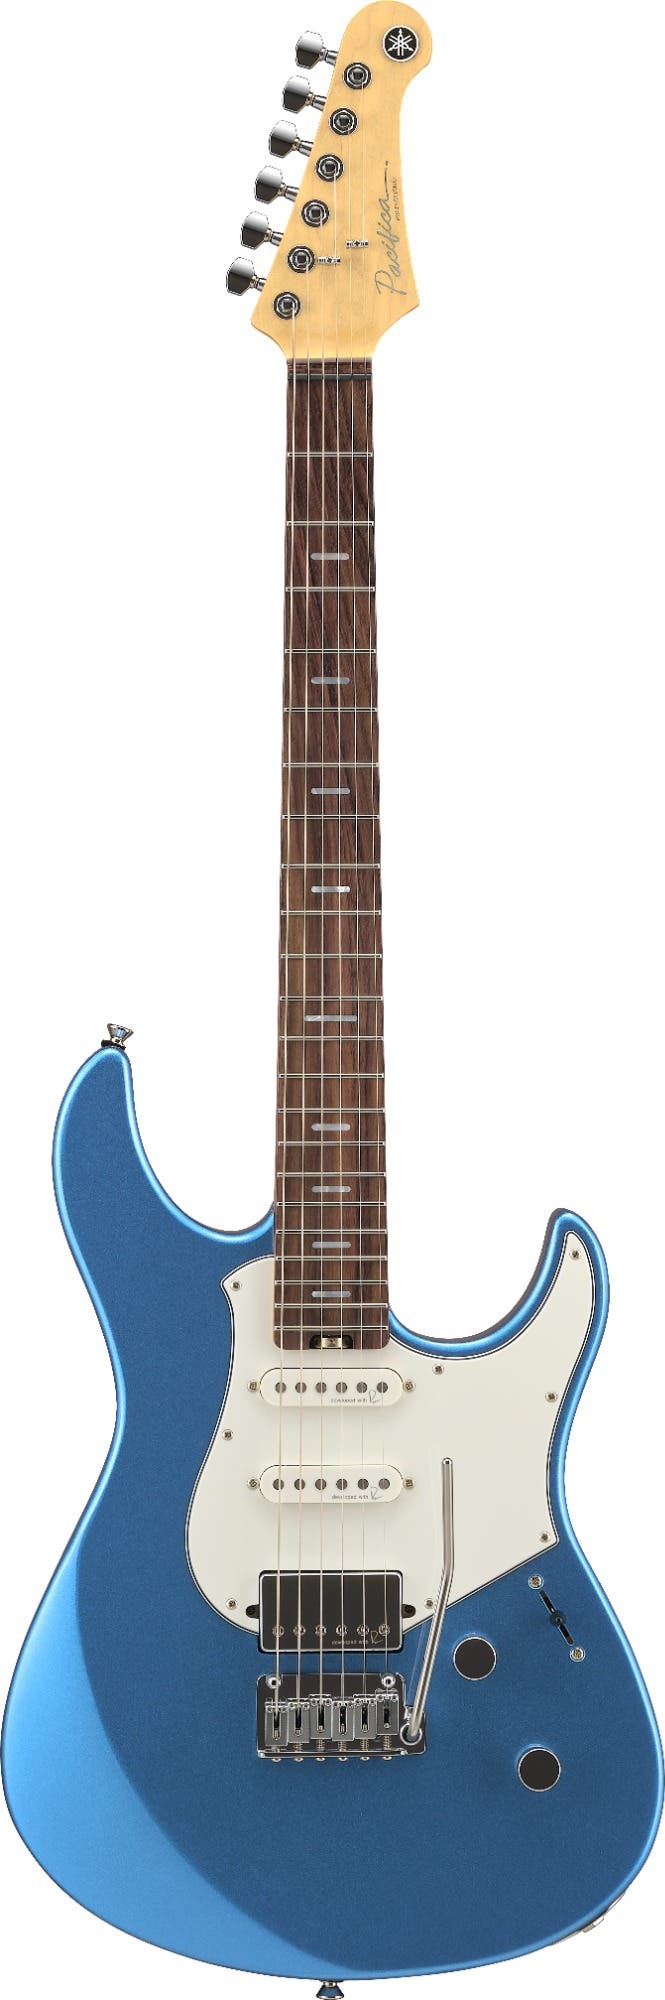 Yamaha PACP12 Pacifica Professional Electric Guitar - Sparkle Blue